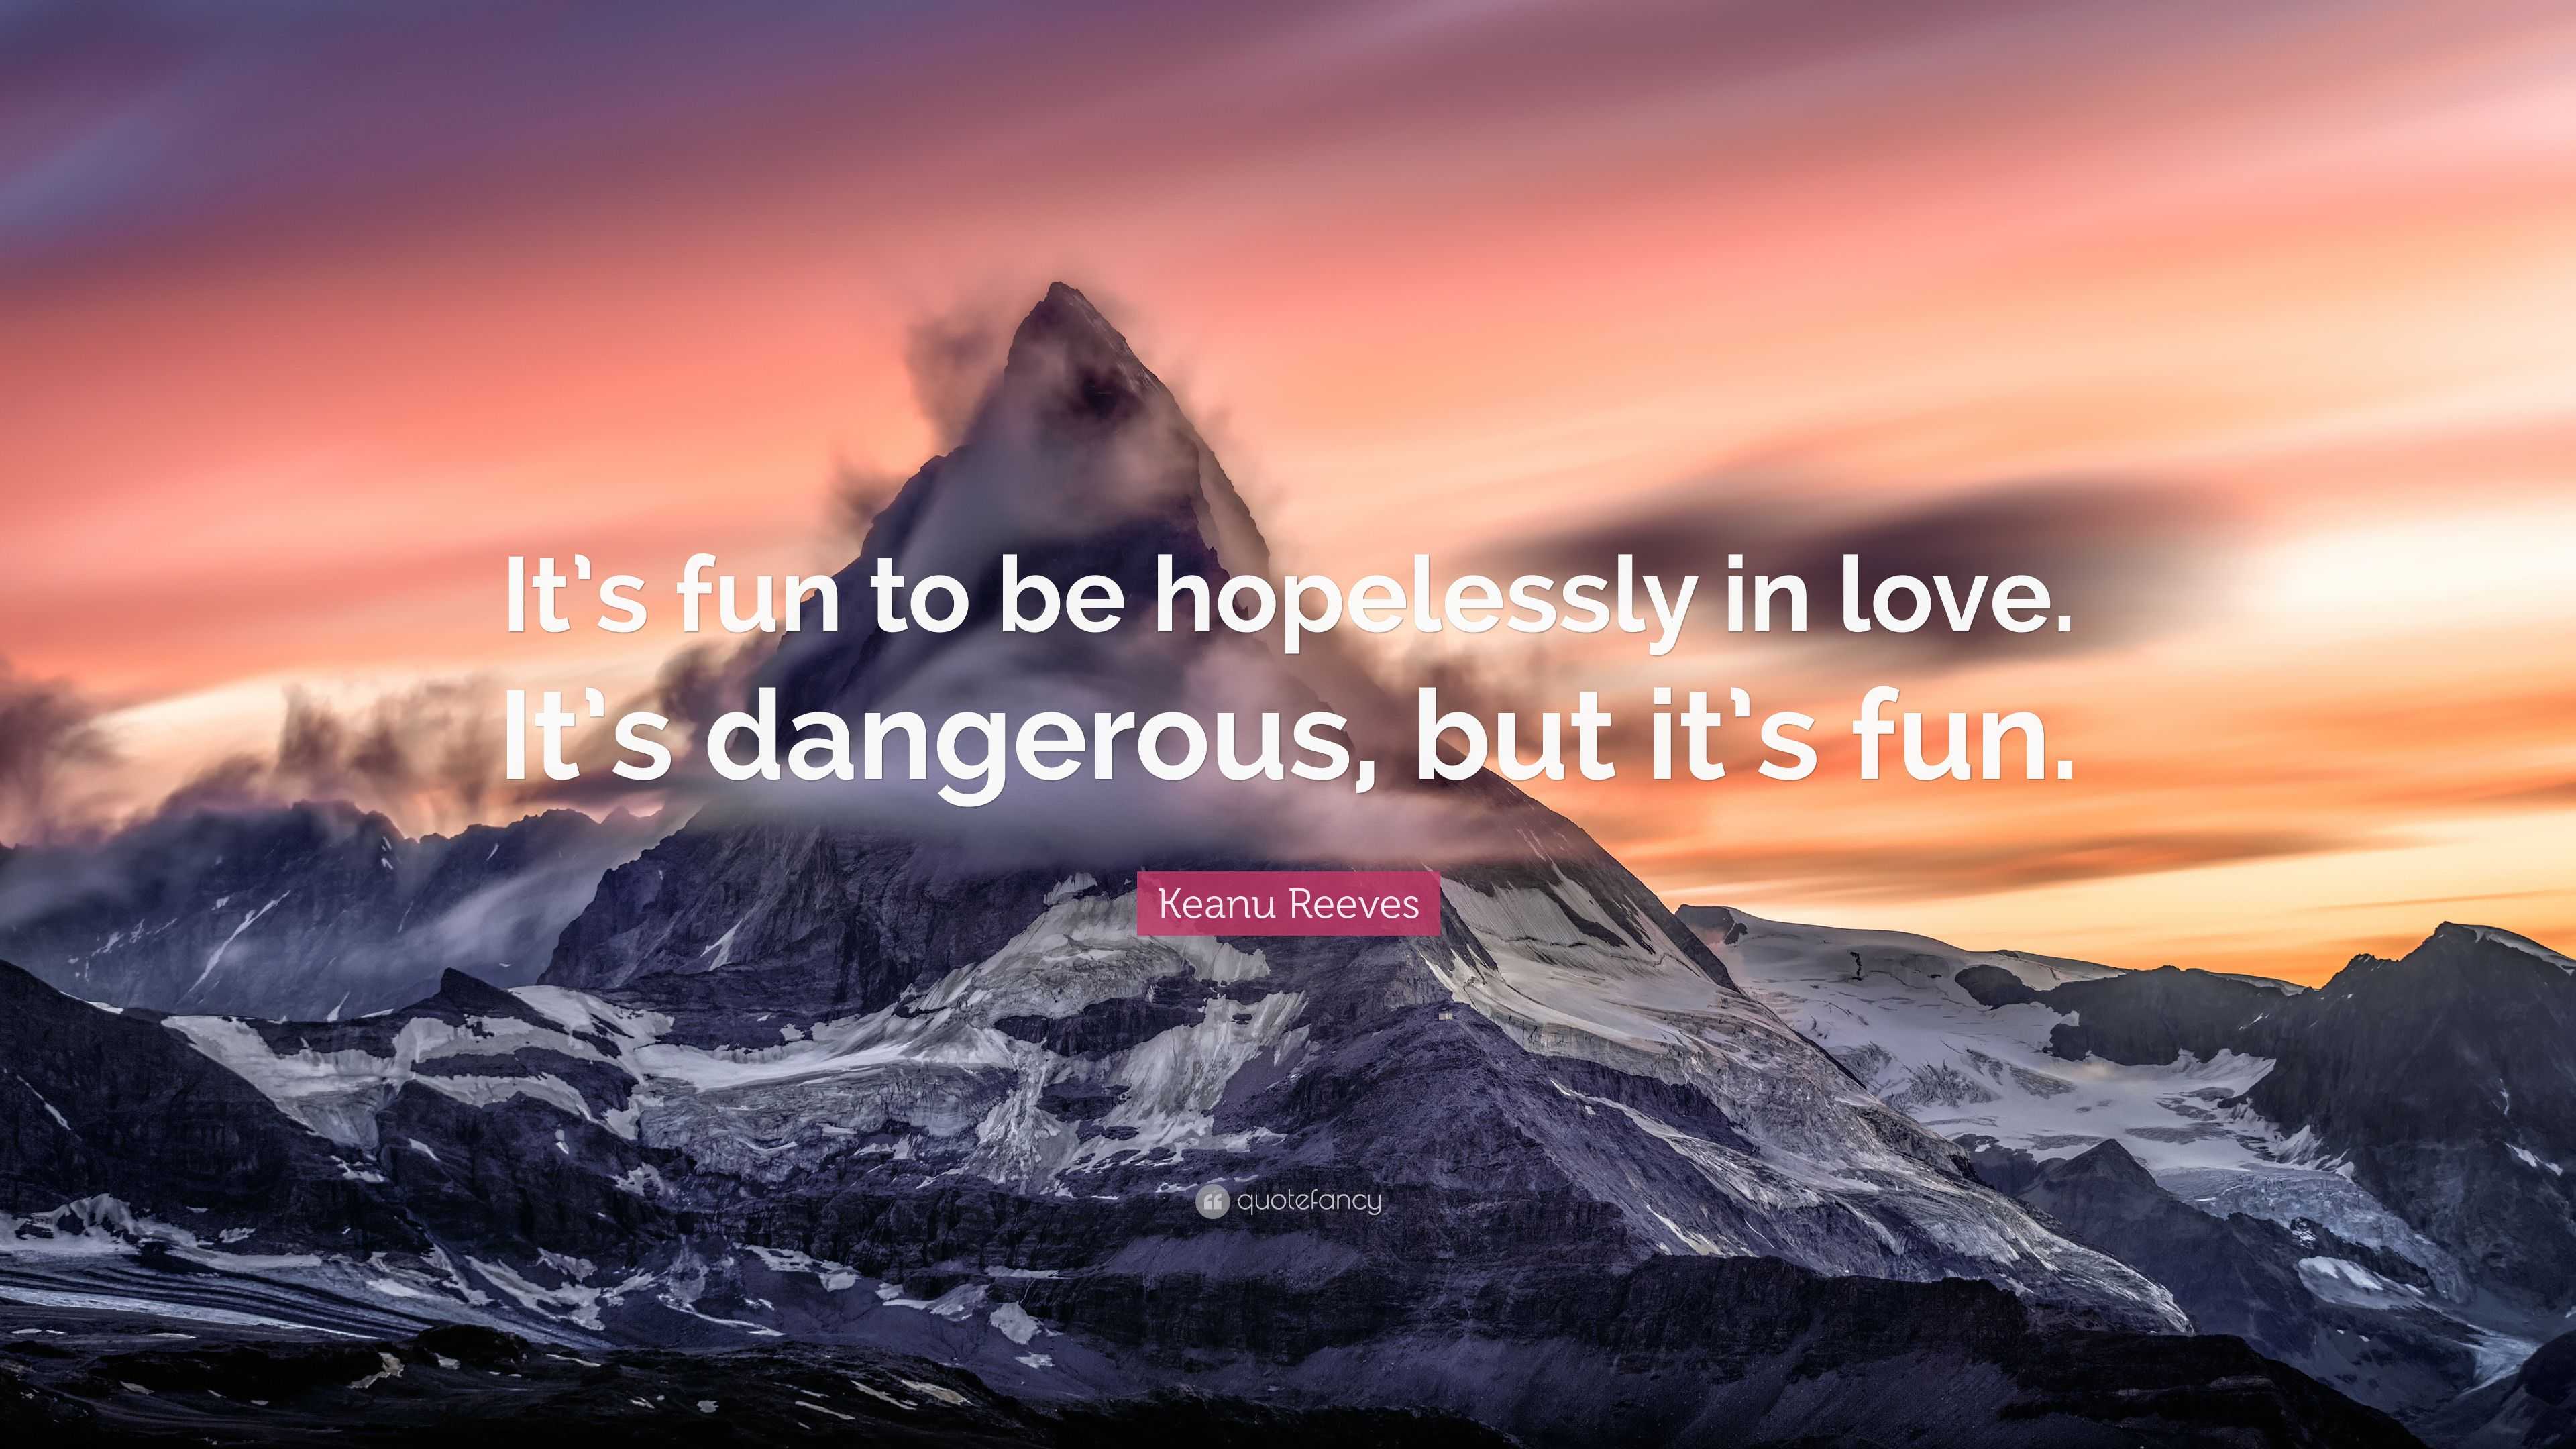 "it"s fun to be hopelessly in love.